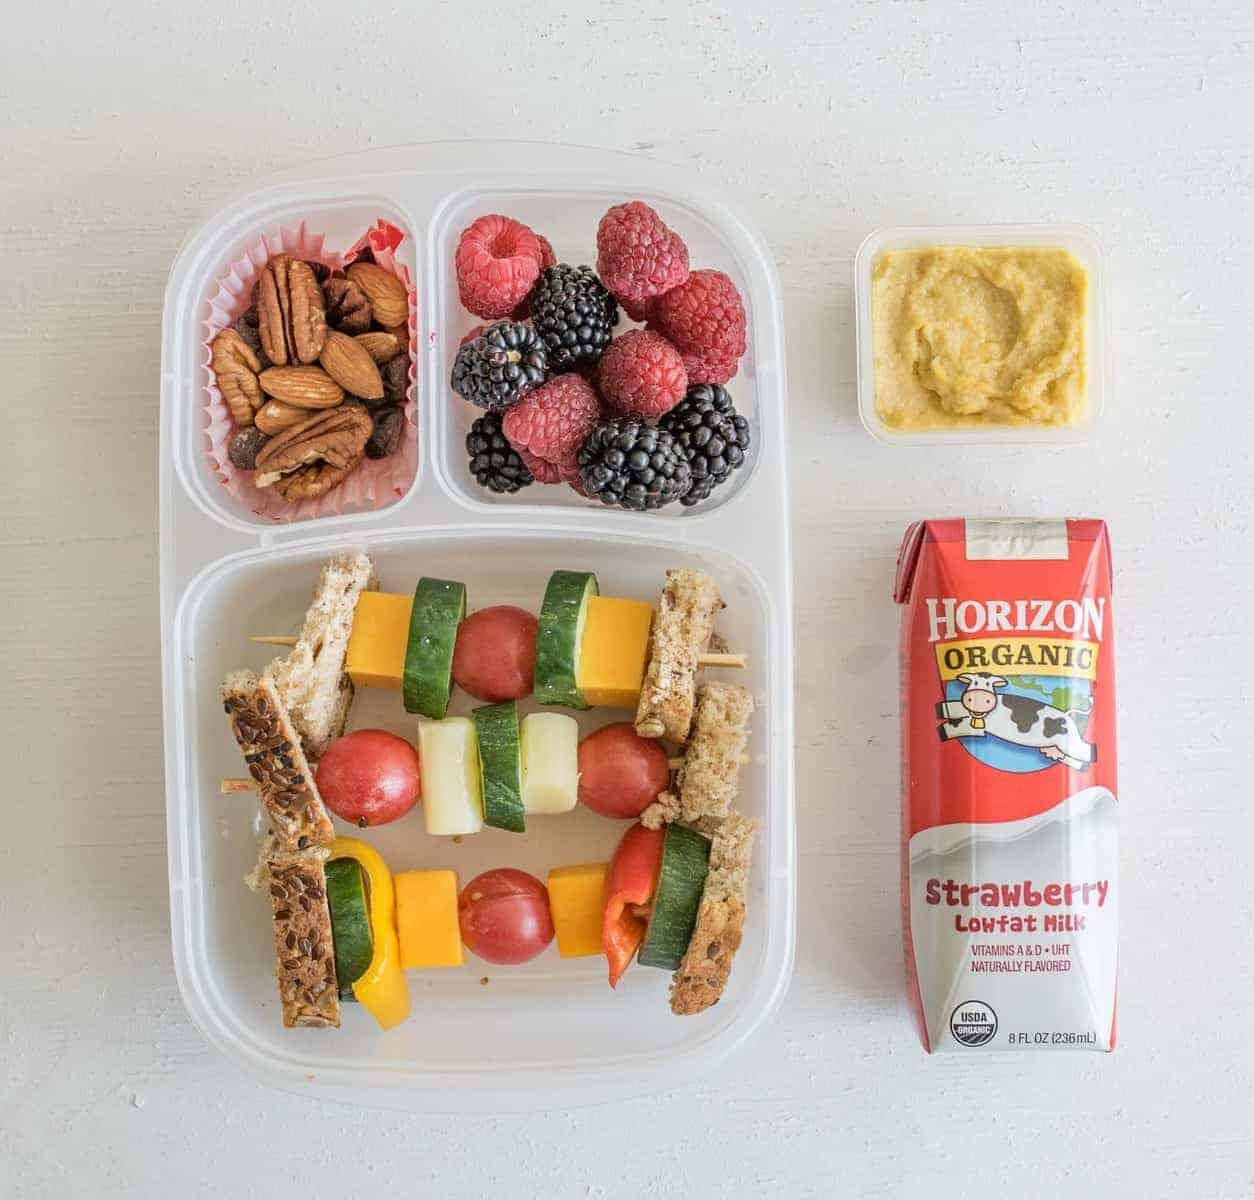 6 Easy "Sandwich-on-a-Stick" Lunch Box Ideas are perfect to take to school or work and are a fun twist on all of your favorite classic sandwiches.